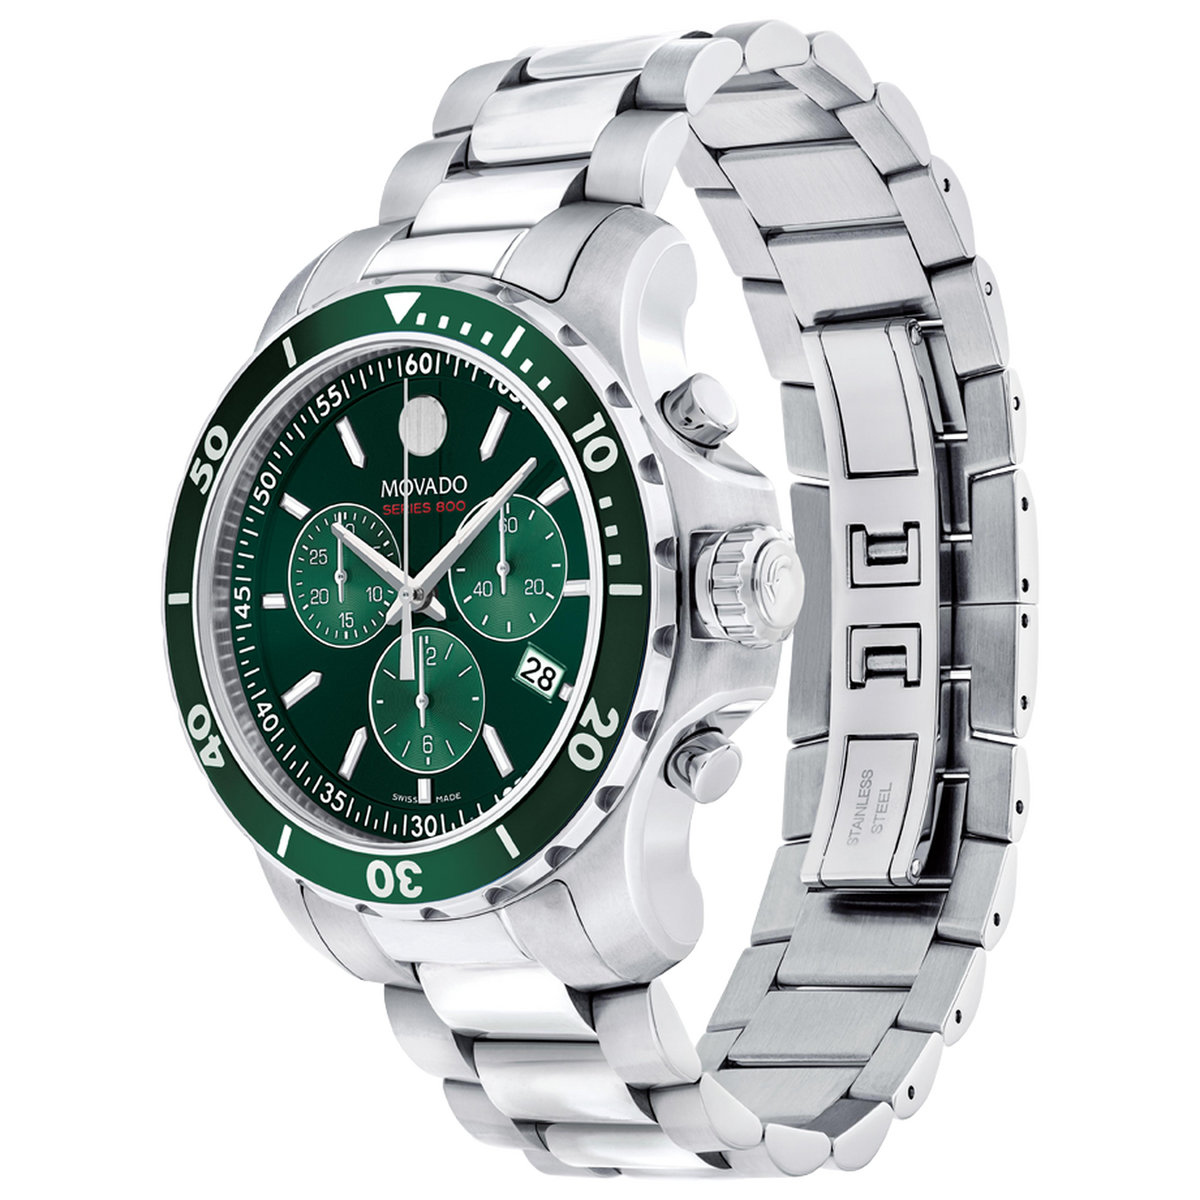 Movado Series 800 Chronograph - Stainless Steel with Green Dial